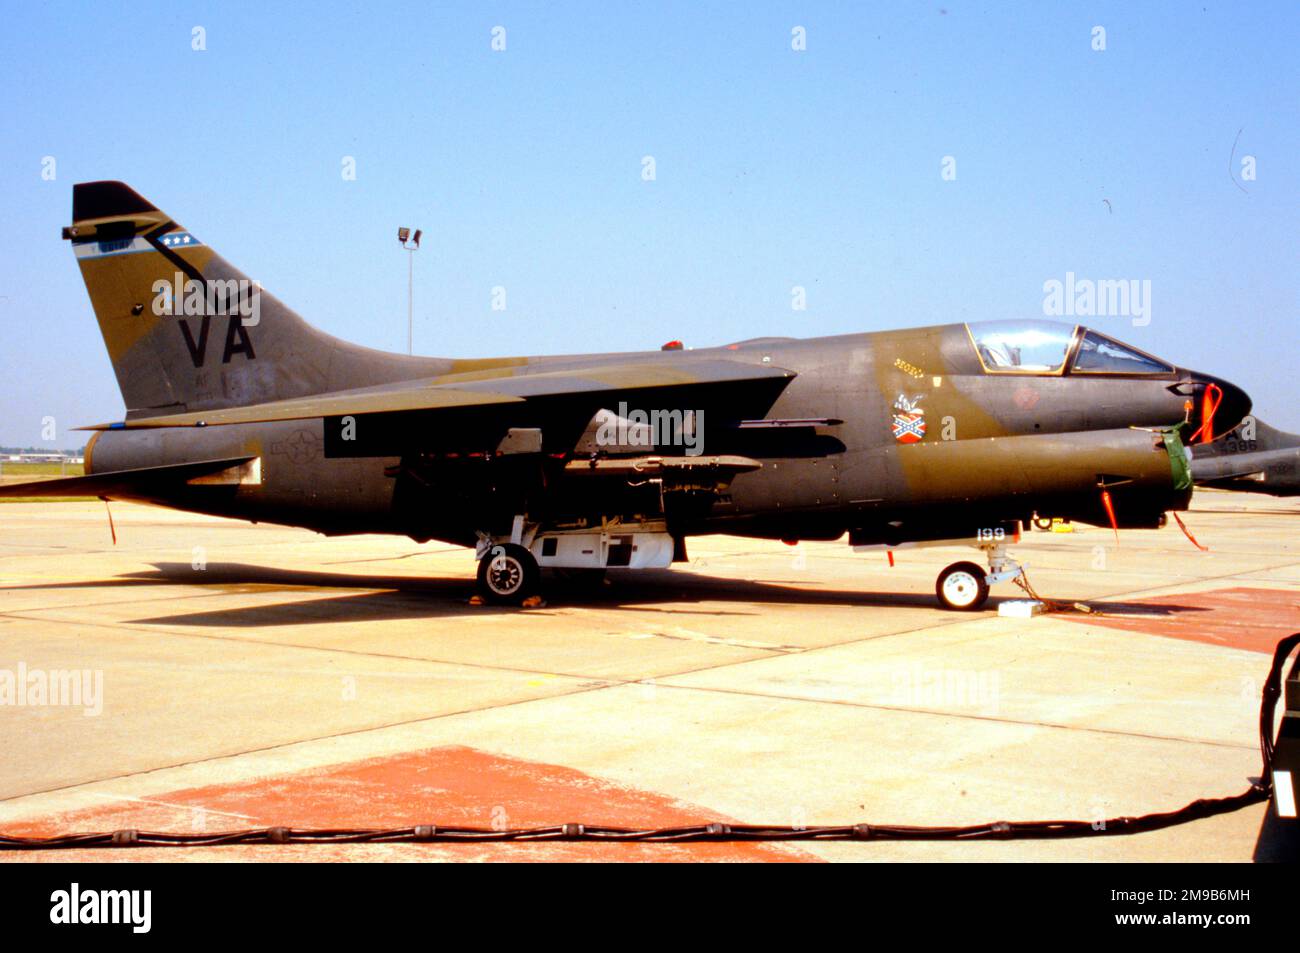 United States Air Force (USAF) - Ling-Temco-Vought A-7D-4-CV Corsair ii, of the 149th Tactical Fighter Squadron, Virginia Air National Guard. Stock Photo